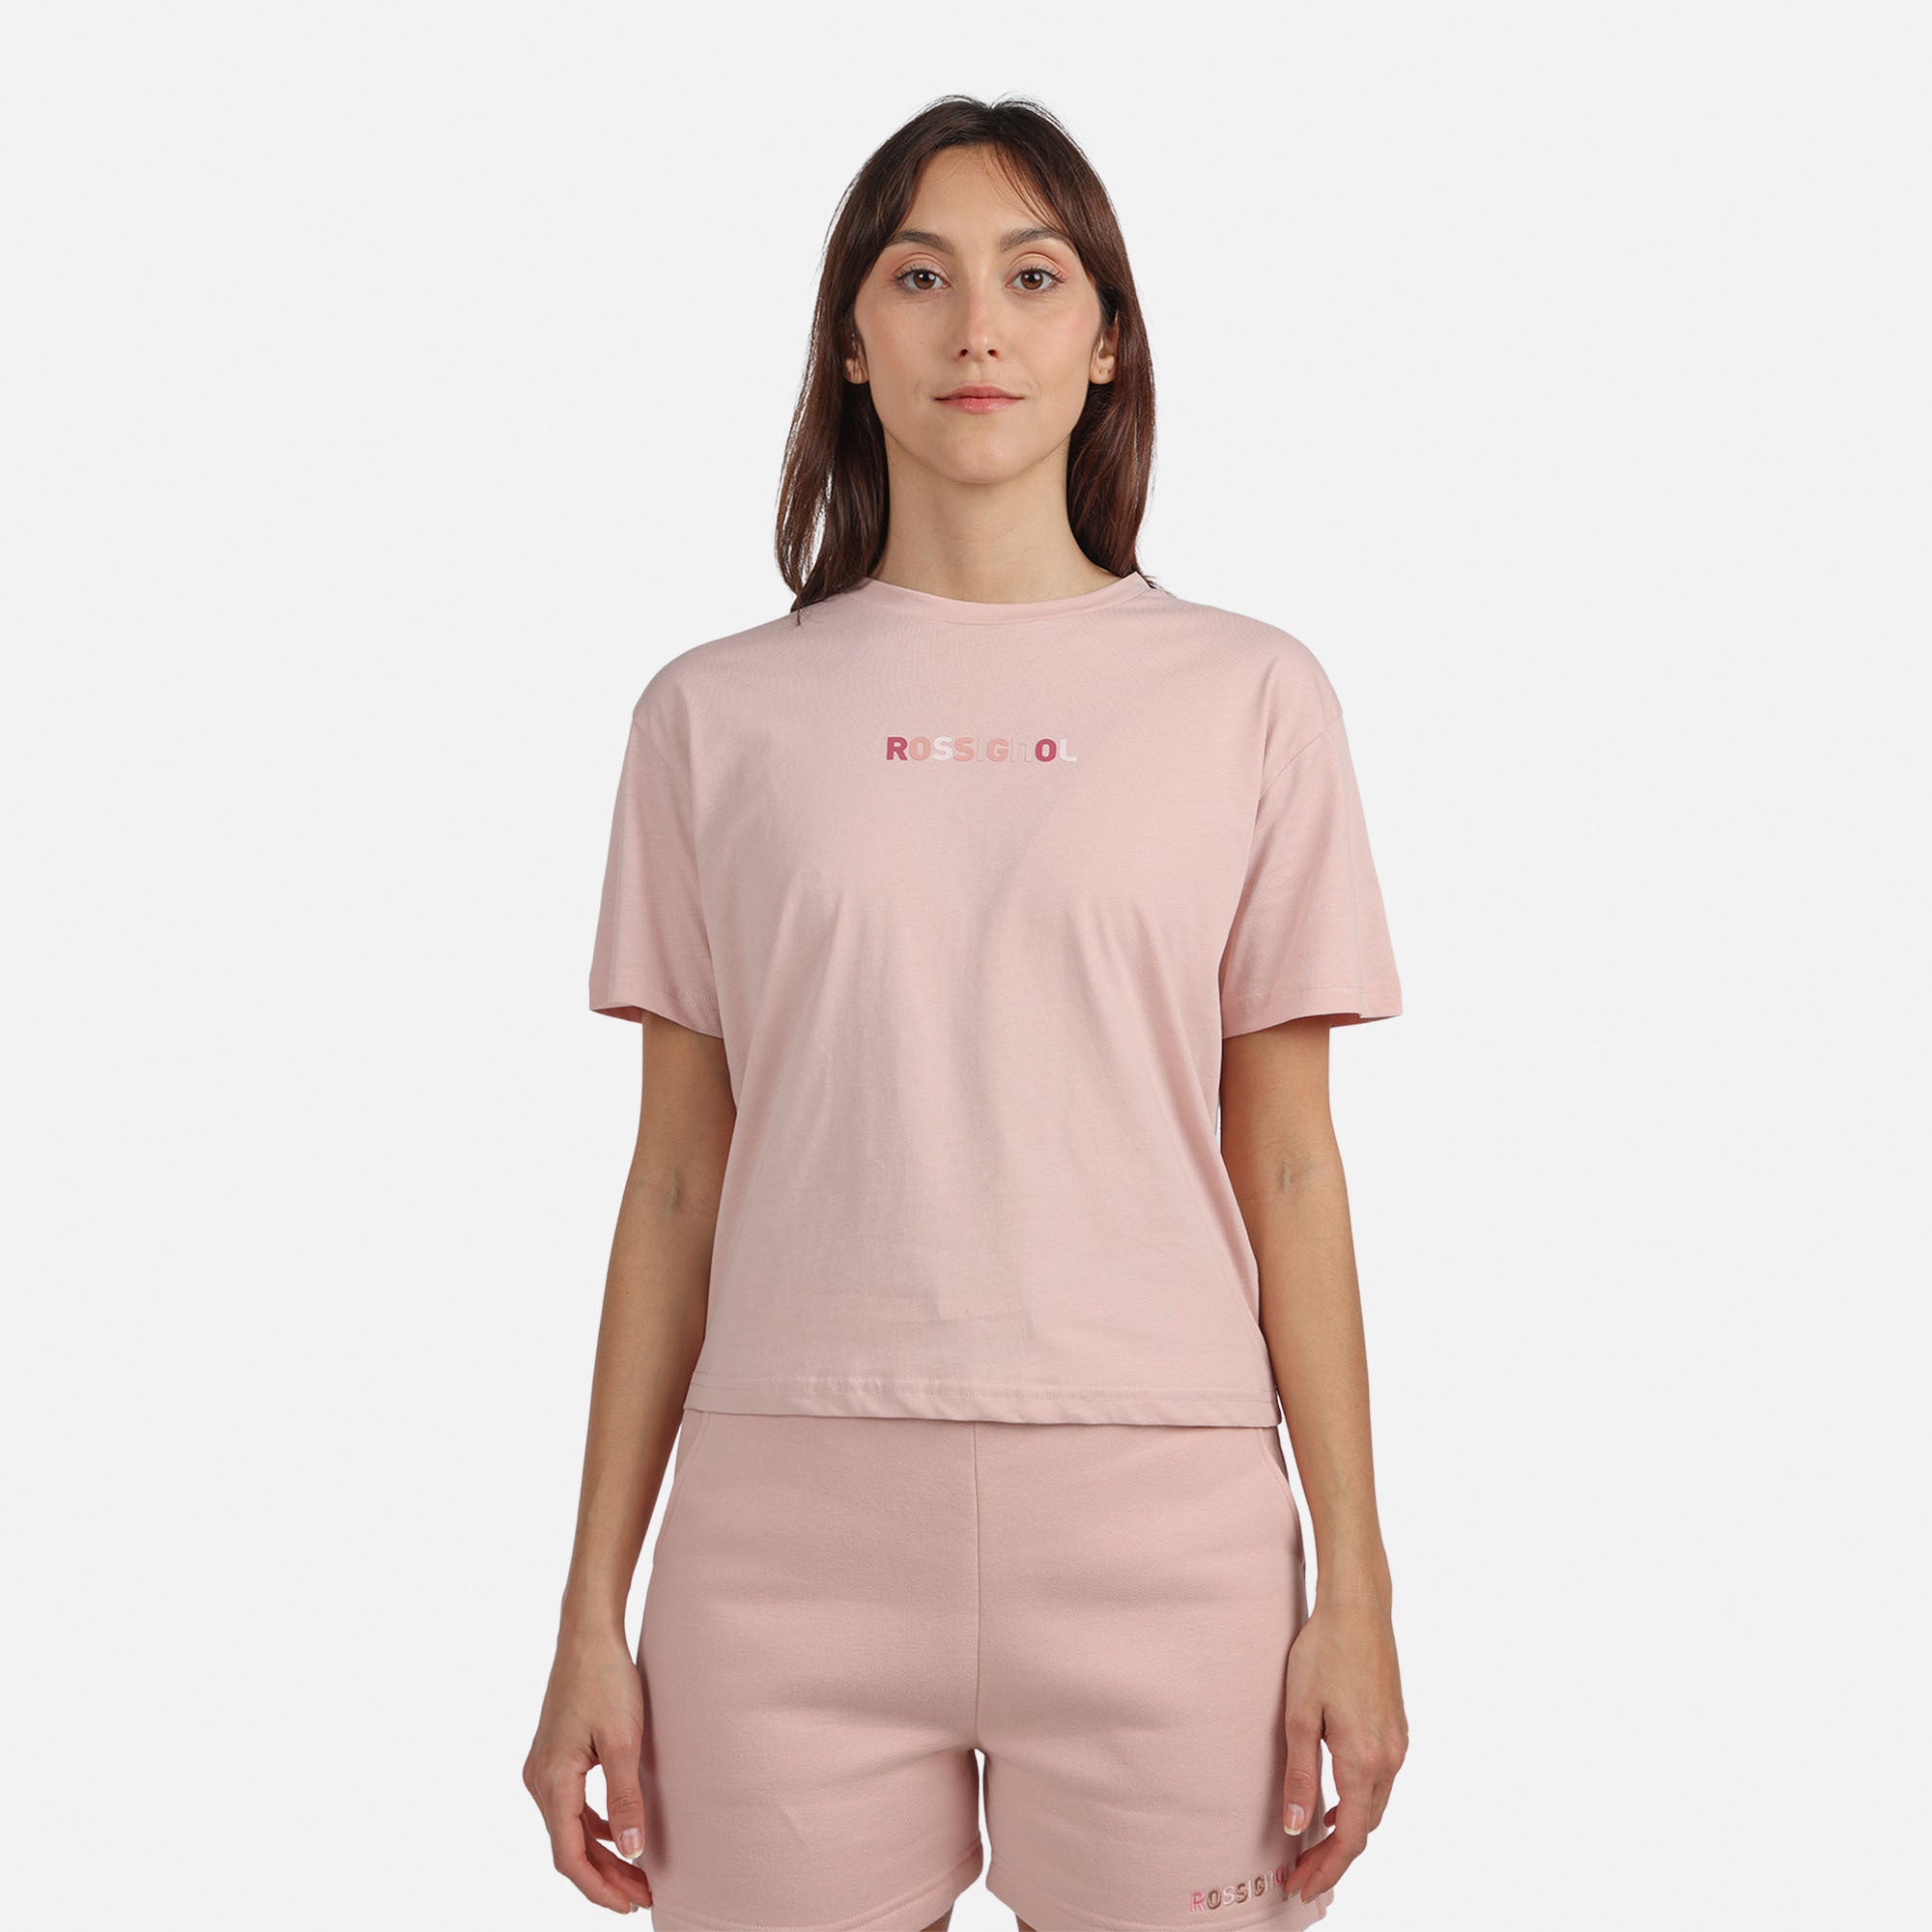 Women's Embroidery T-Shirt